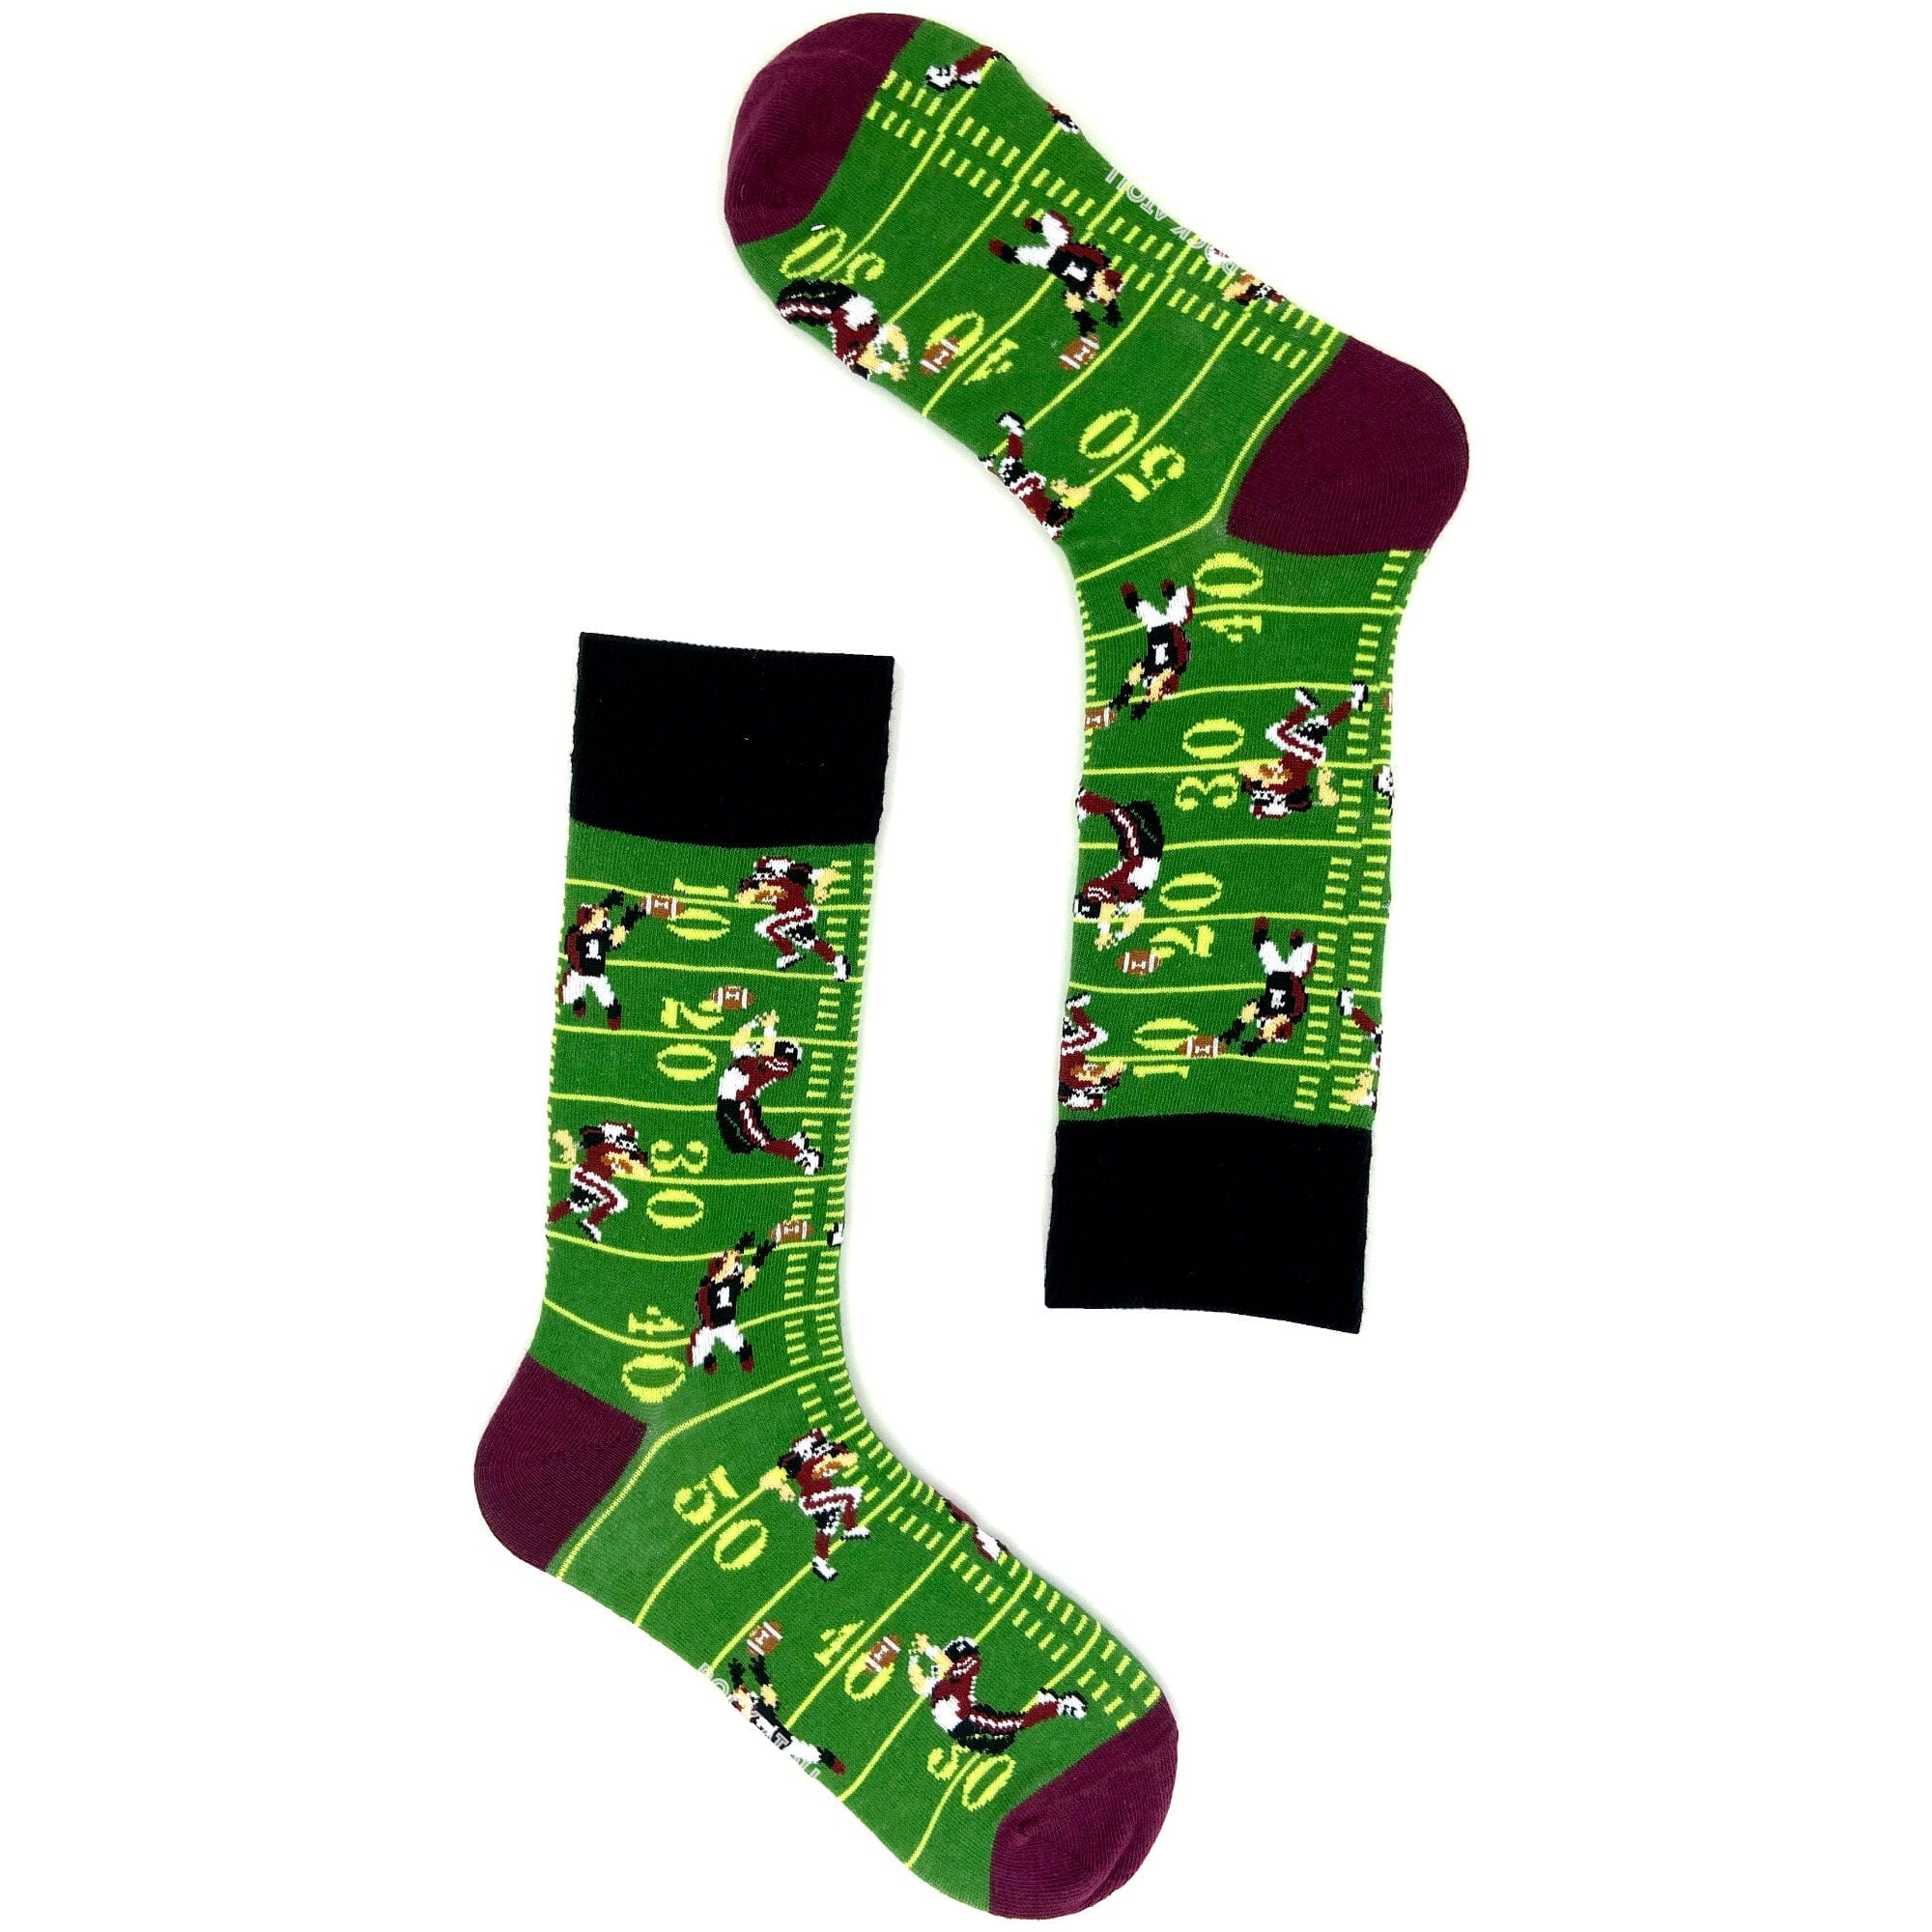 American Football Pitch Touchdown Patterned Comfy Novelty Crew Socks